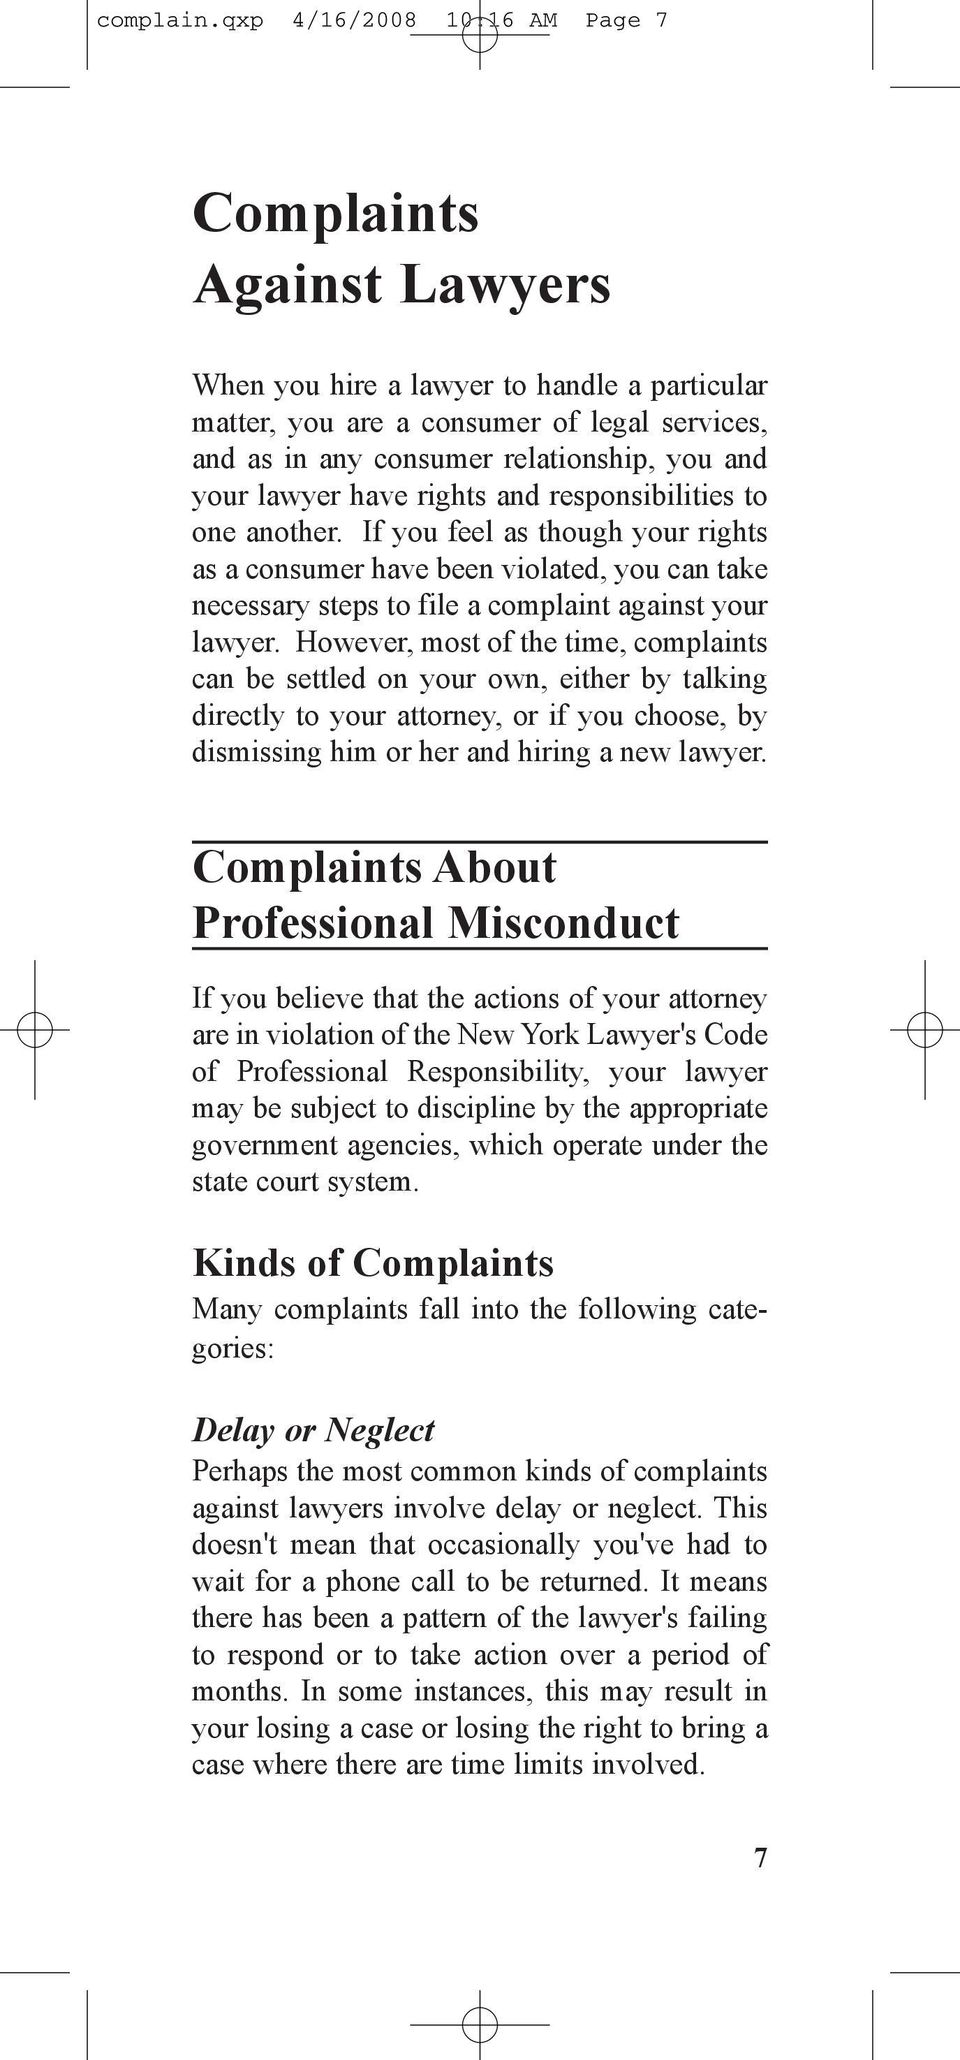 lawyer have rights and responsibilities to one another. If you feel as though your rights as a consumer have been violated, you can take necessary steps to file a complaint against your lawyer.